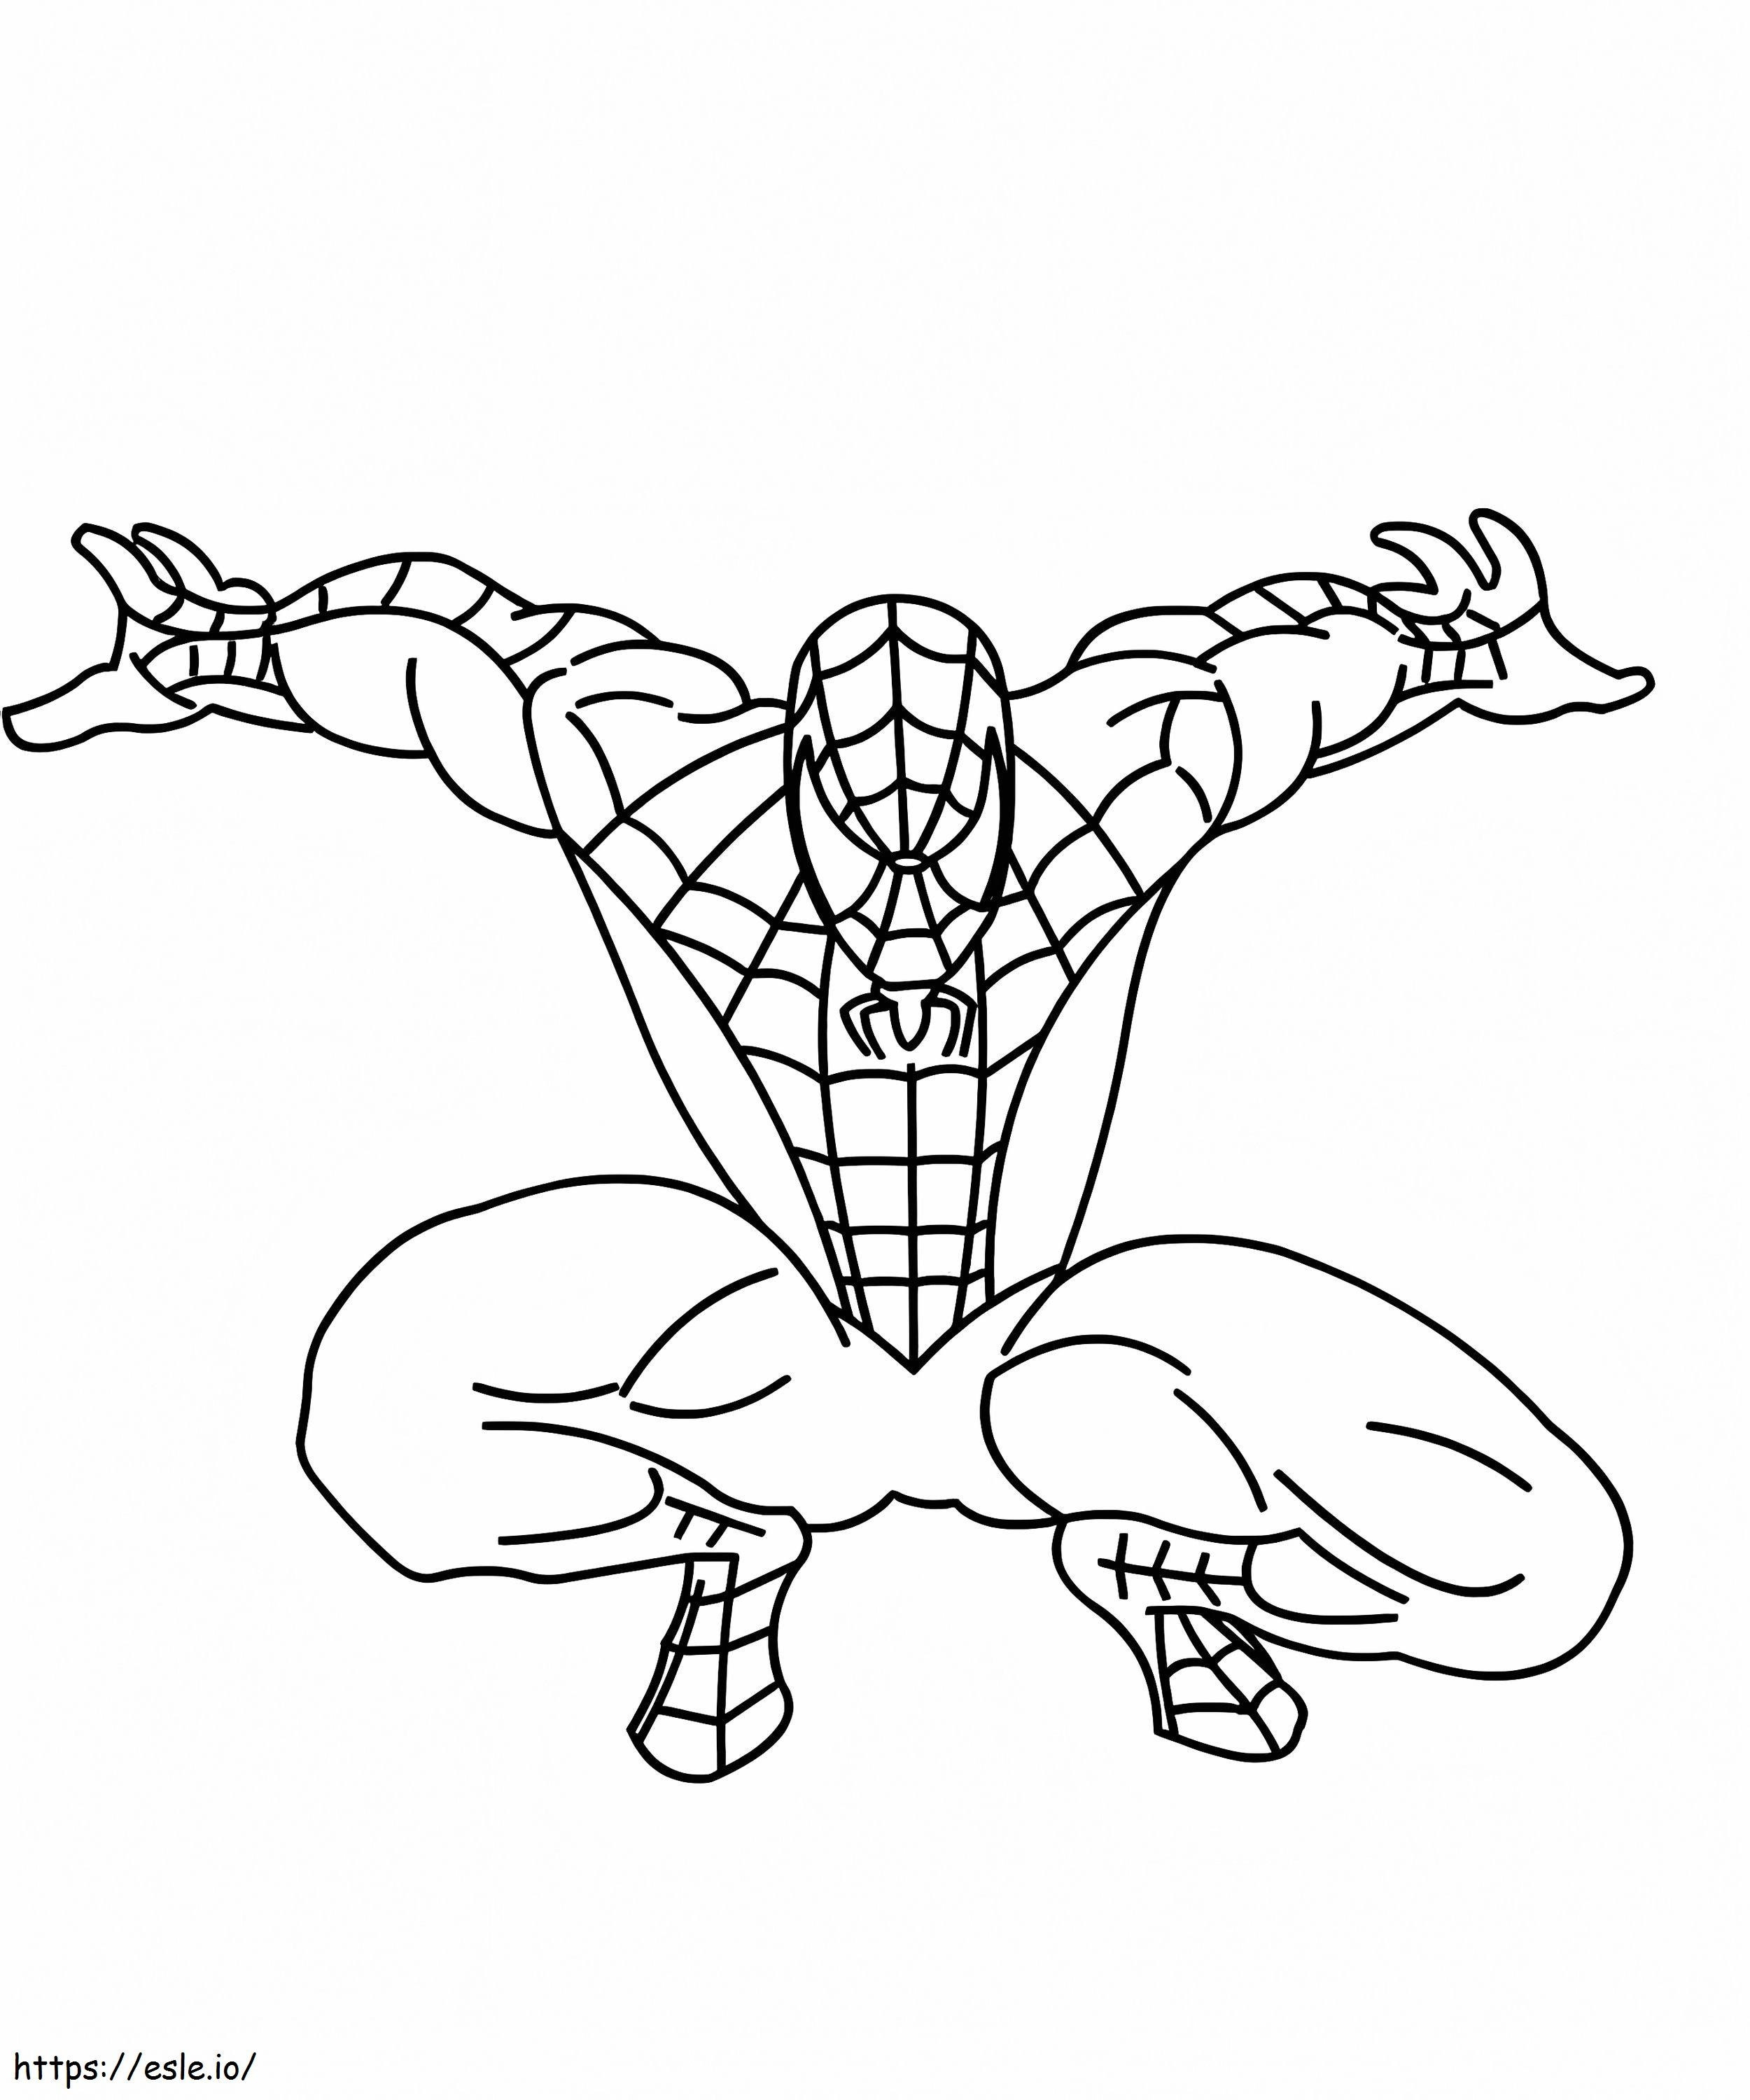 Easy Spiderman coloring page